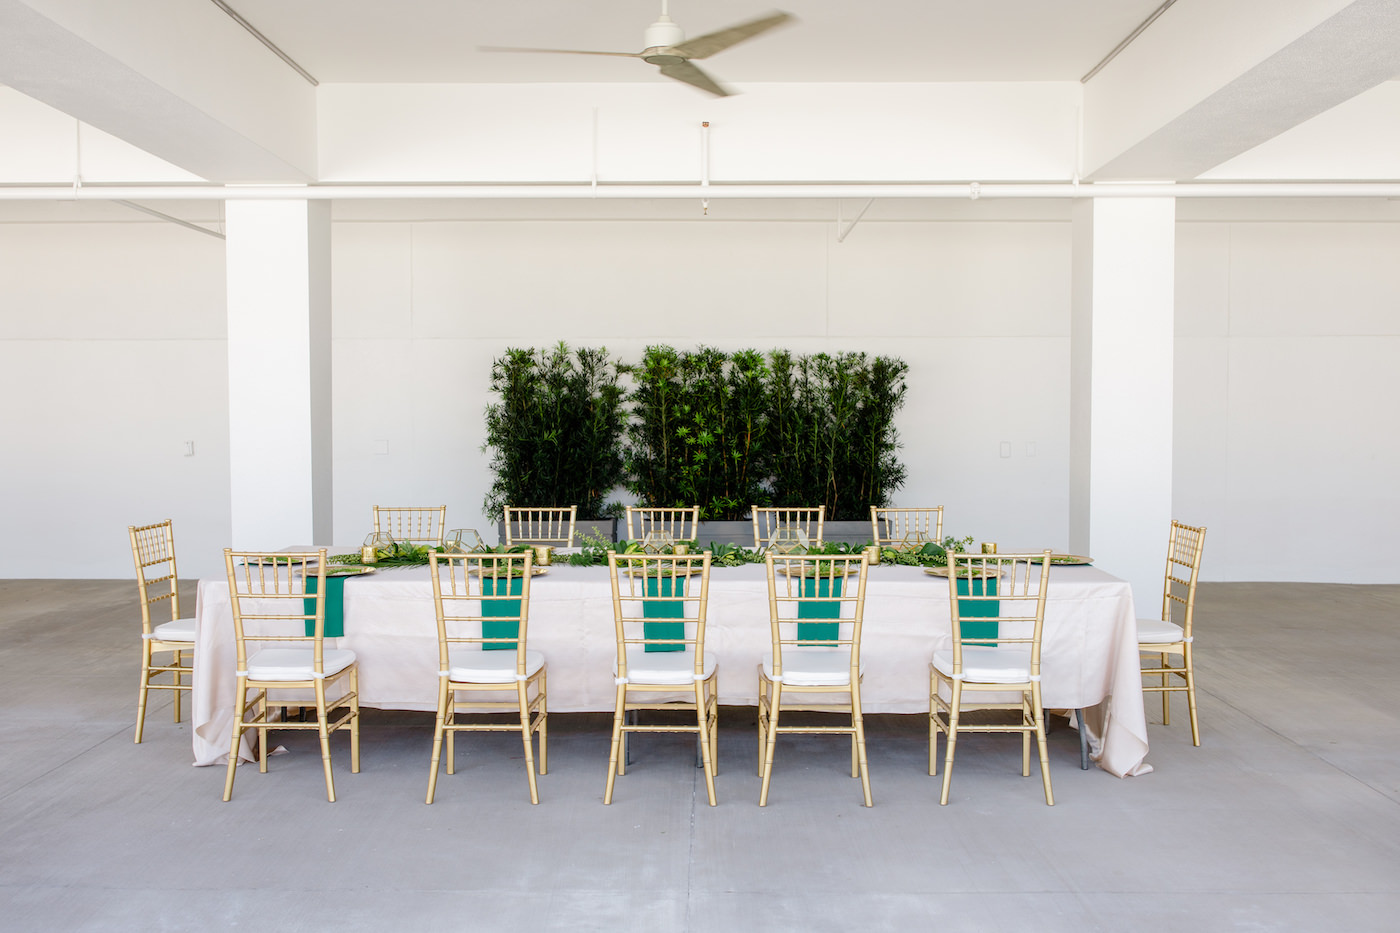 Clearwater Beach Wedding Venue Hilton Clearwater Beach | Modern Tropical Beach Outdoor Wedding Reception Terrace Feasting Table with Champagne Table Linens and Emerald Green Napkins under Gold Charger Plates | Gold Chiavari Chairs and Tropical Palm Frond Leaf Floral Arrangement Garland